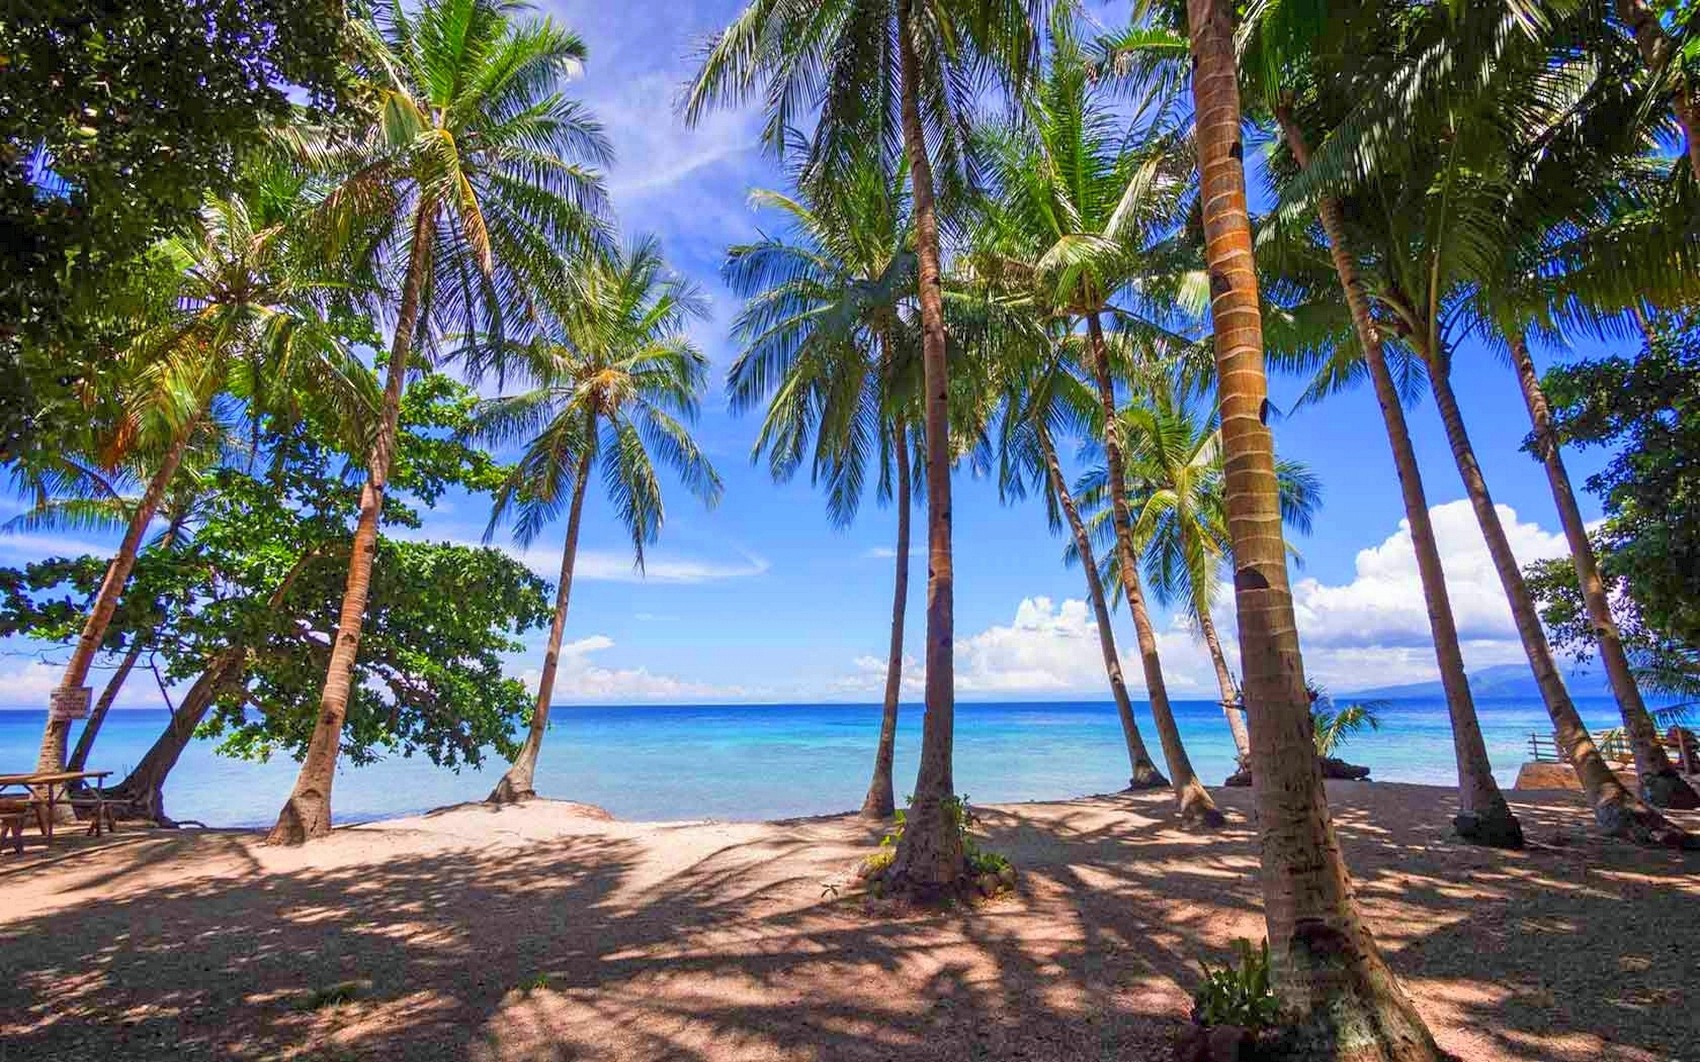 photography, Nature, Landscape, Palm trees, Beach, Tropical, Sea, Sunlight, Shadow, Philippines Wallpaper